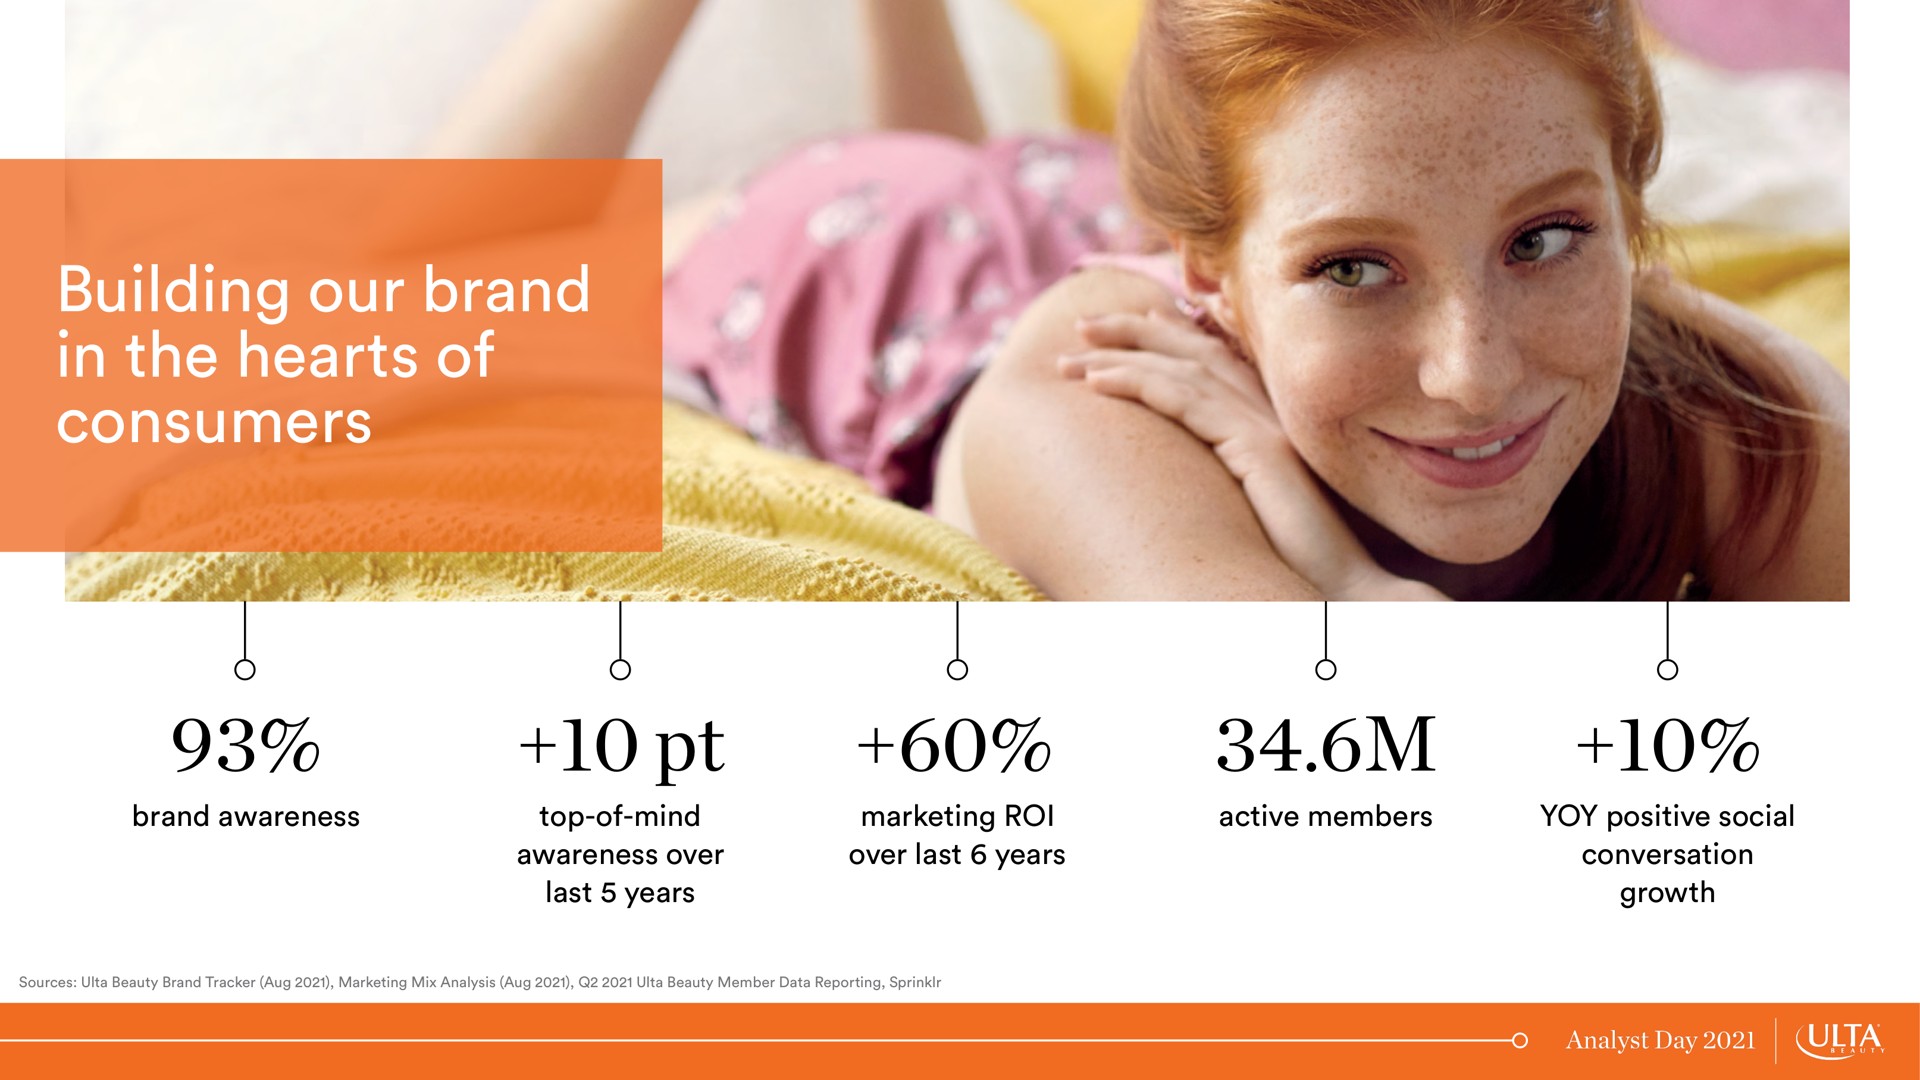 building our brand in the hearts of consumers | Ulta Beauty